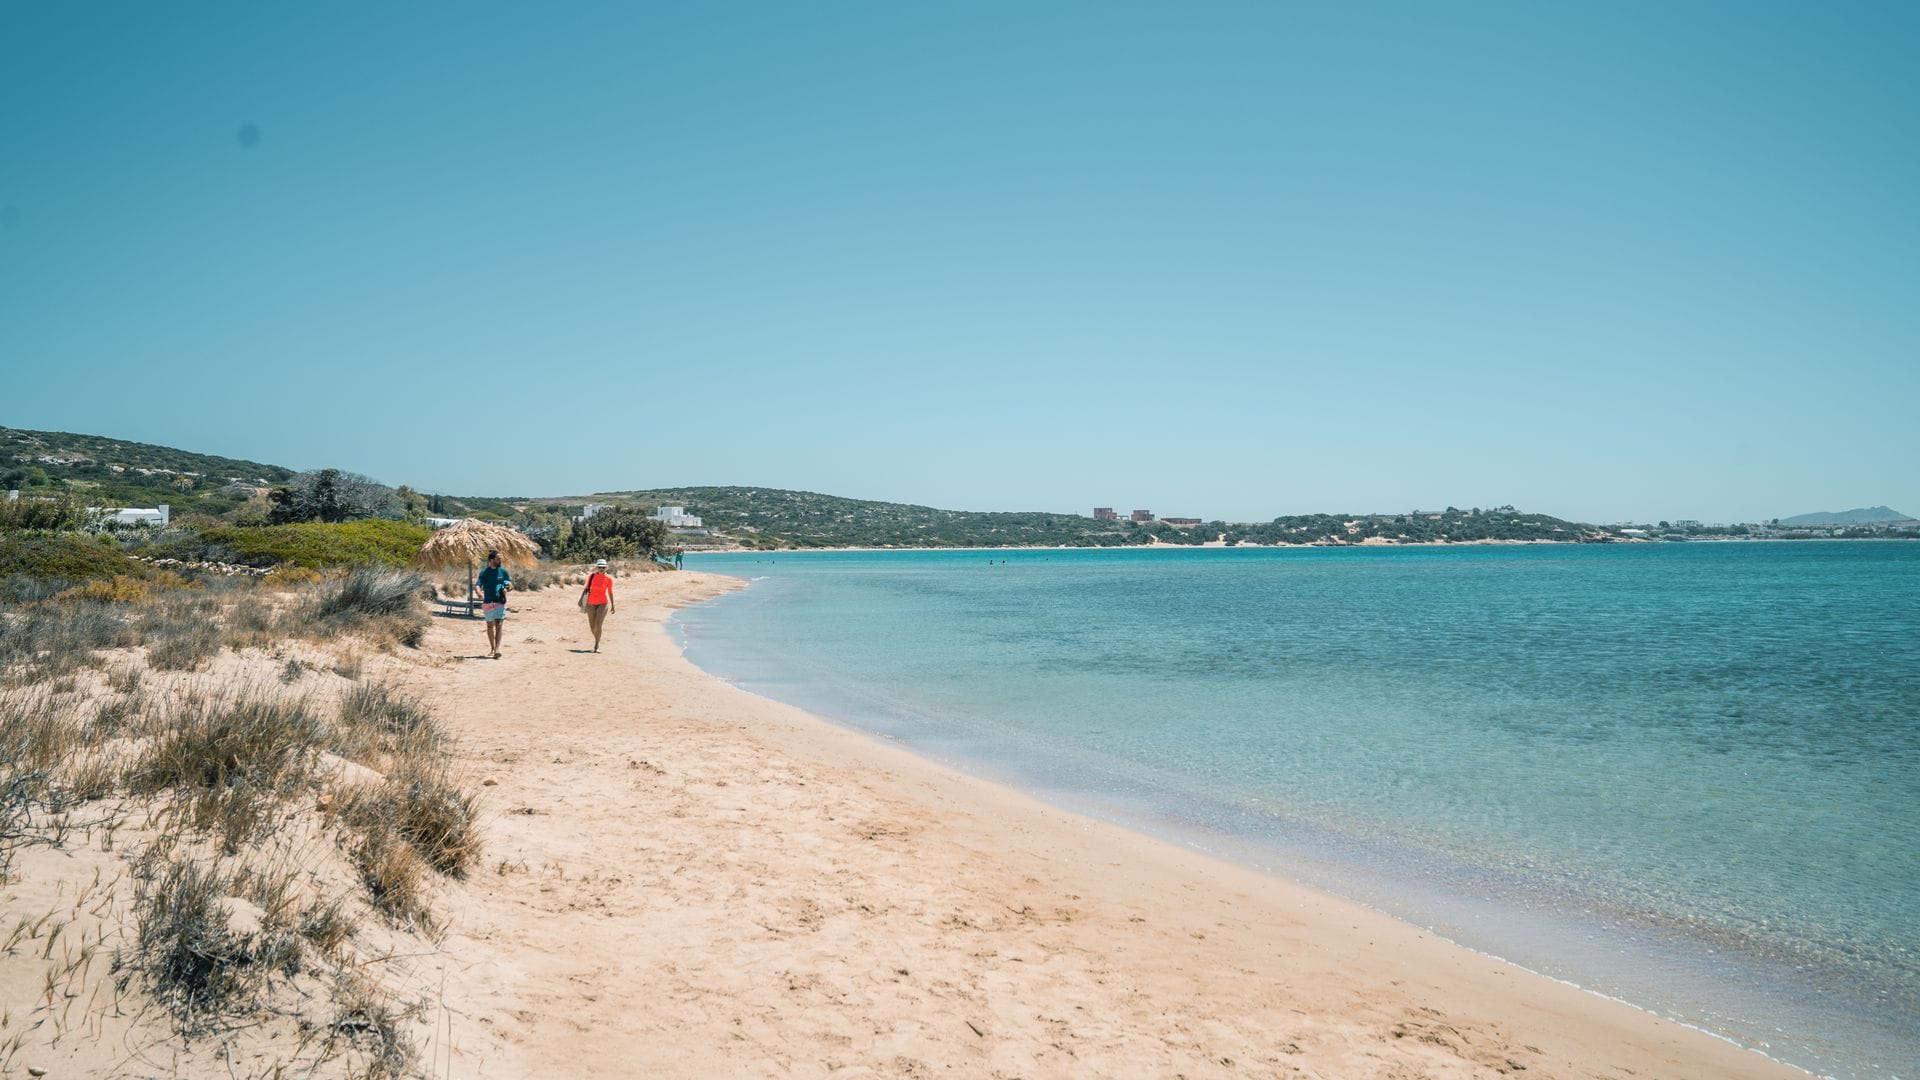 Lageri is one of the most exotic beaches in Paros